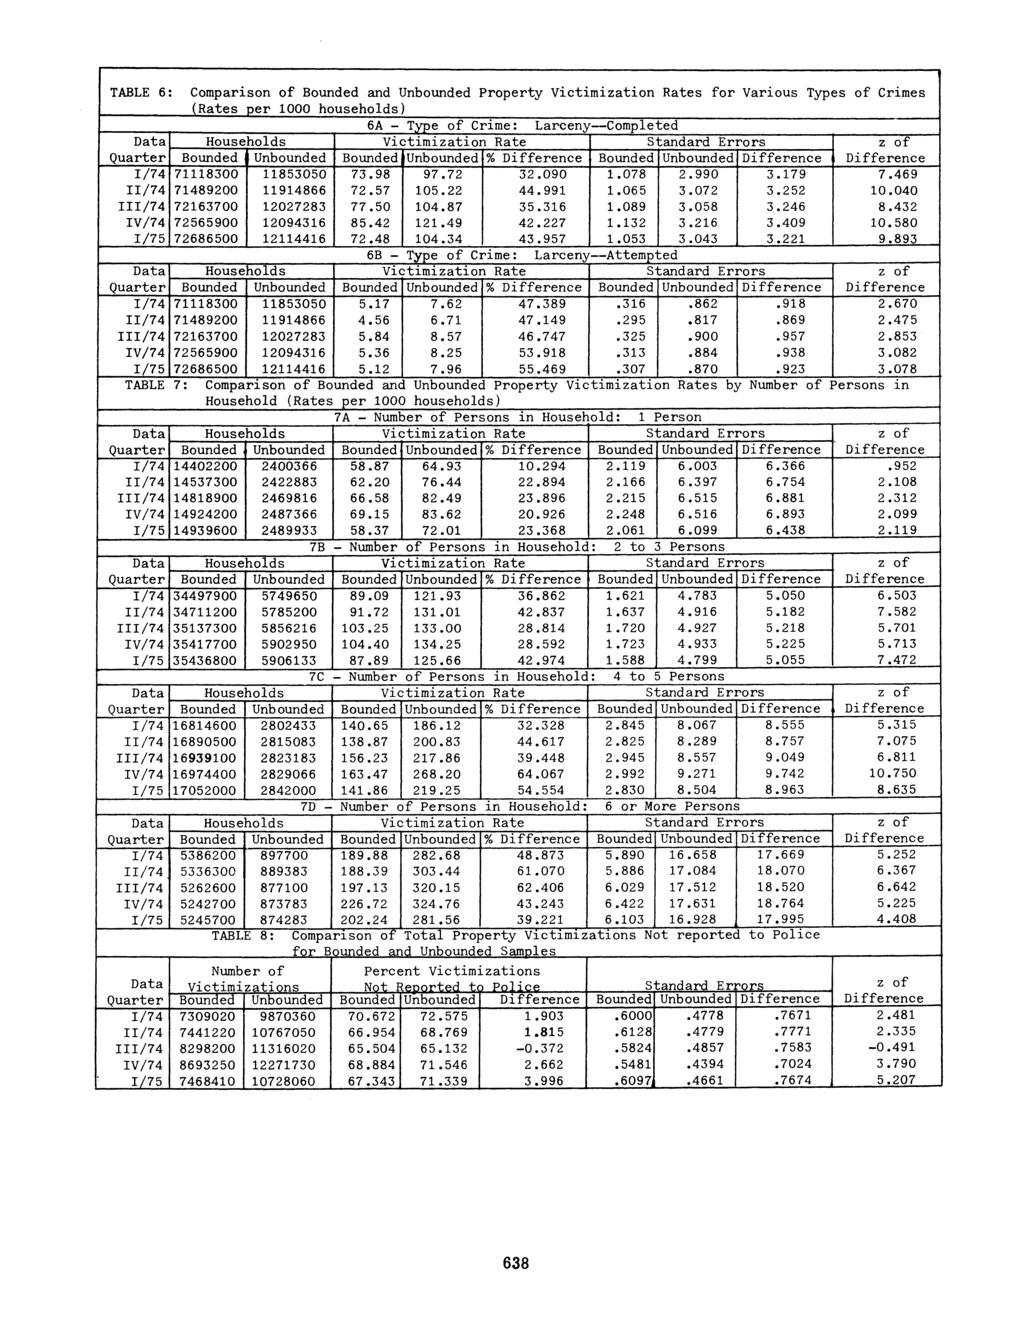 TABLE 6: Comparison of Bounded and Unbounded Property Victimization Rates for Various Types of Crimes (Rates per 1000 households) 6A - Type of Crime: Larceny -Completed I 71118300 71489200 72163700